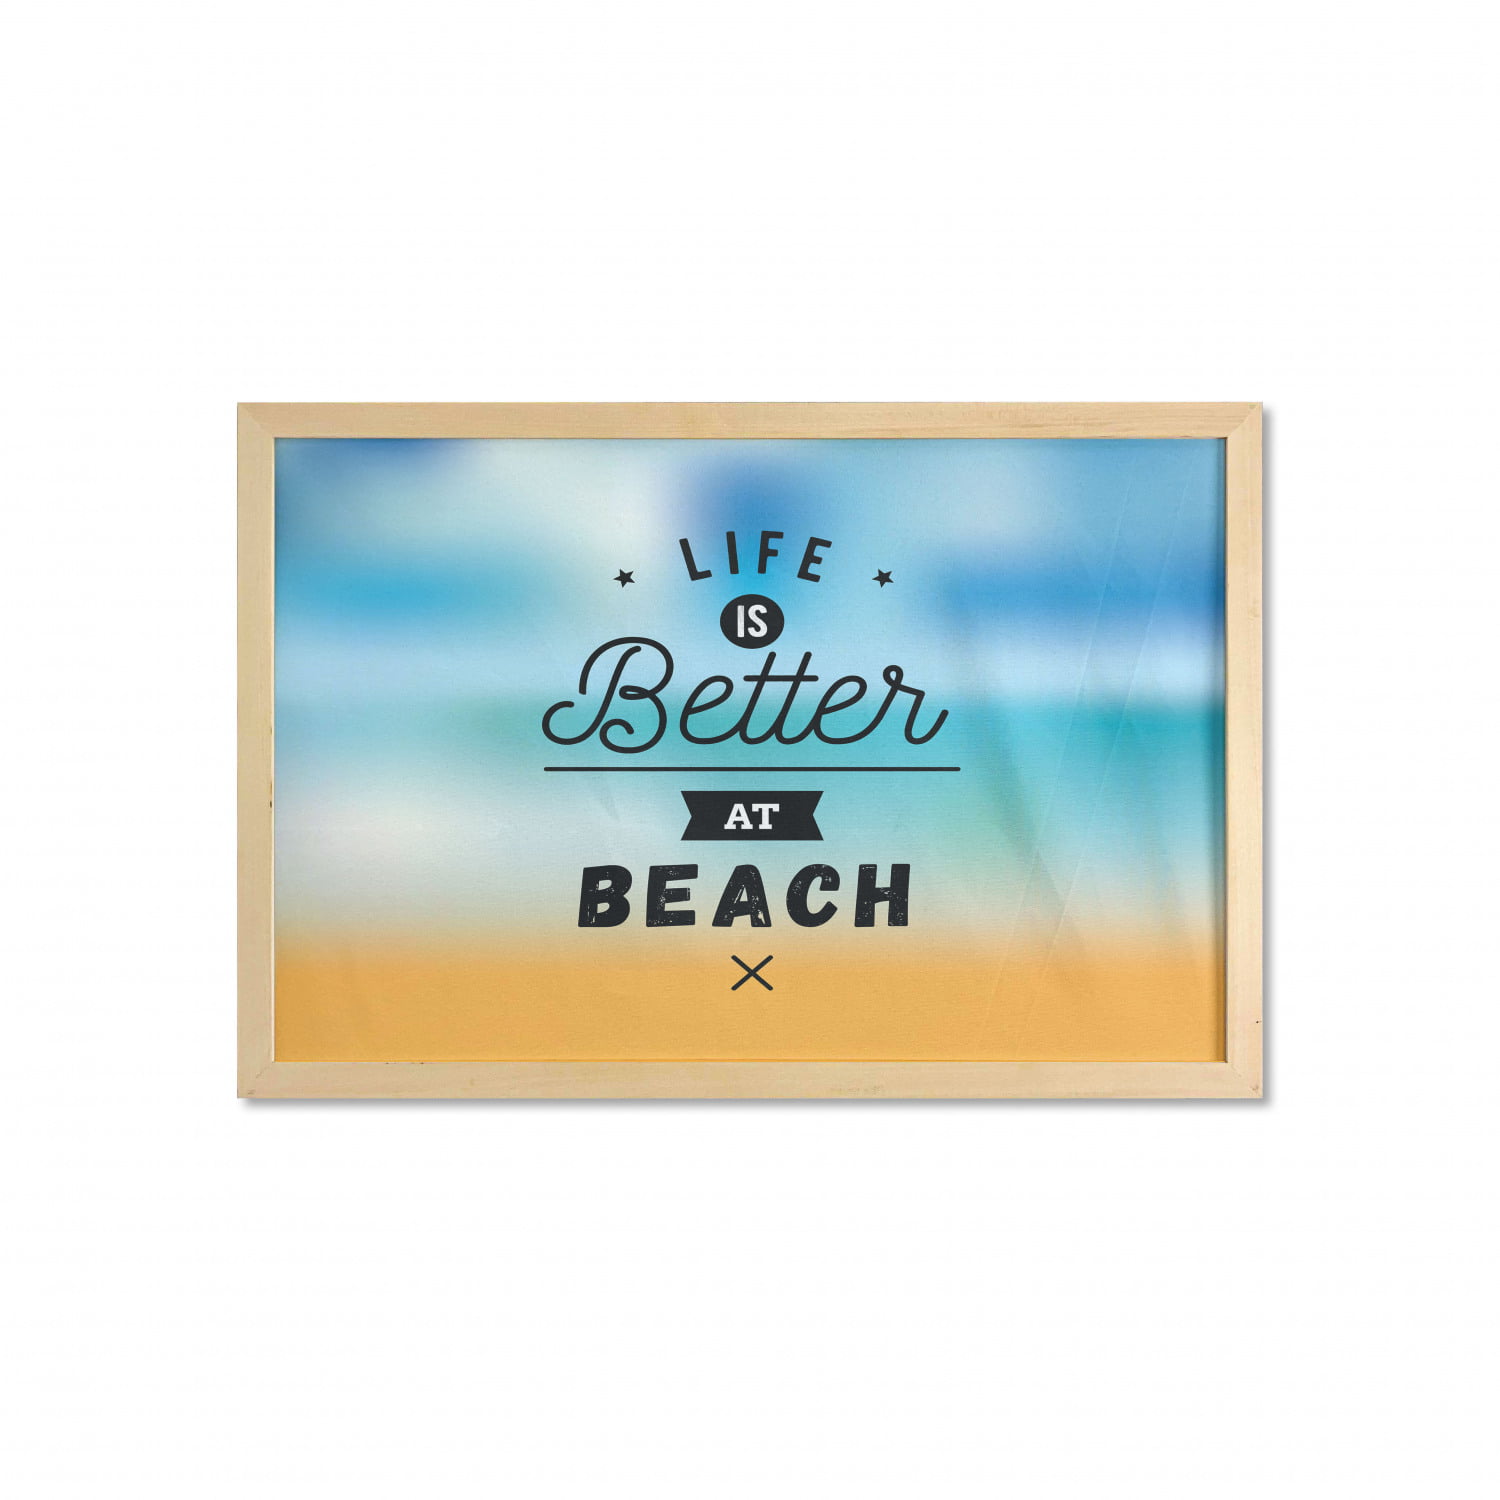 "Life is better at beach" Stretched Canvas Print Framed Wall Art Decor Painting 